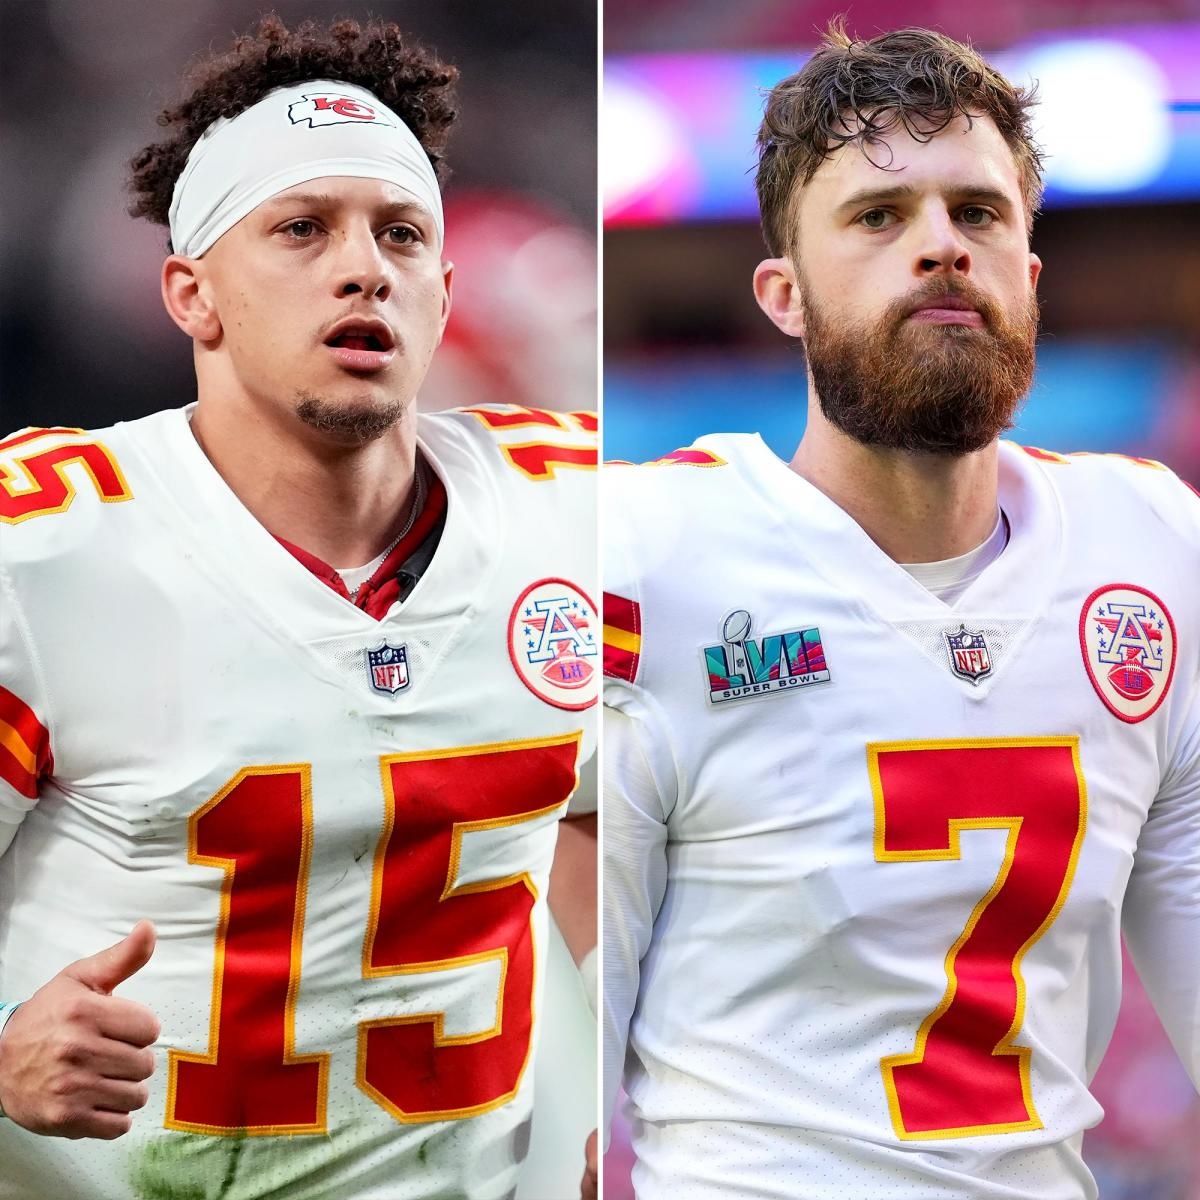 "Patrick Mahomes Drops Cryptic Hint: Harrison Butker Called 'Good Person' Yet Disagreements Lurk Beneath the Surface"